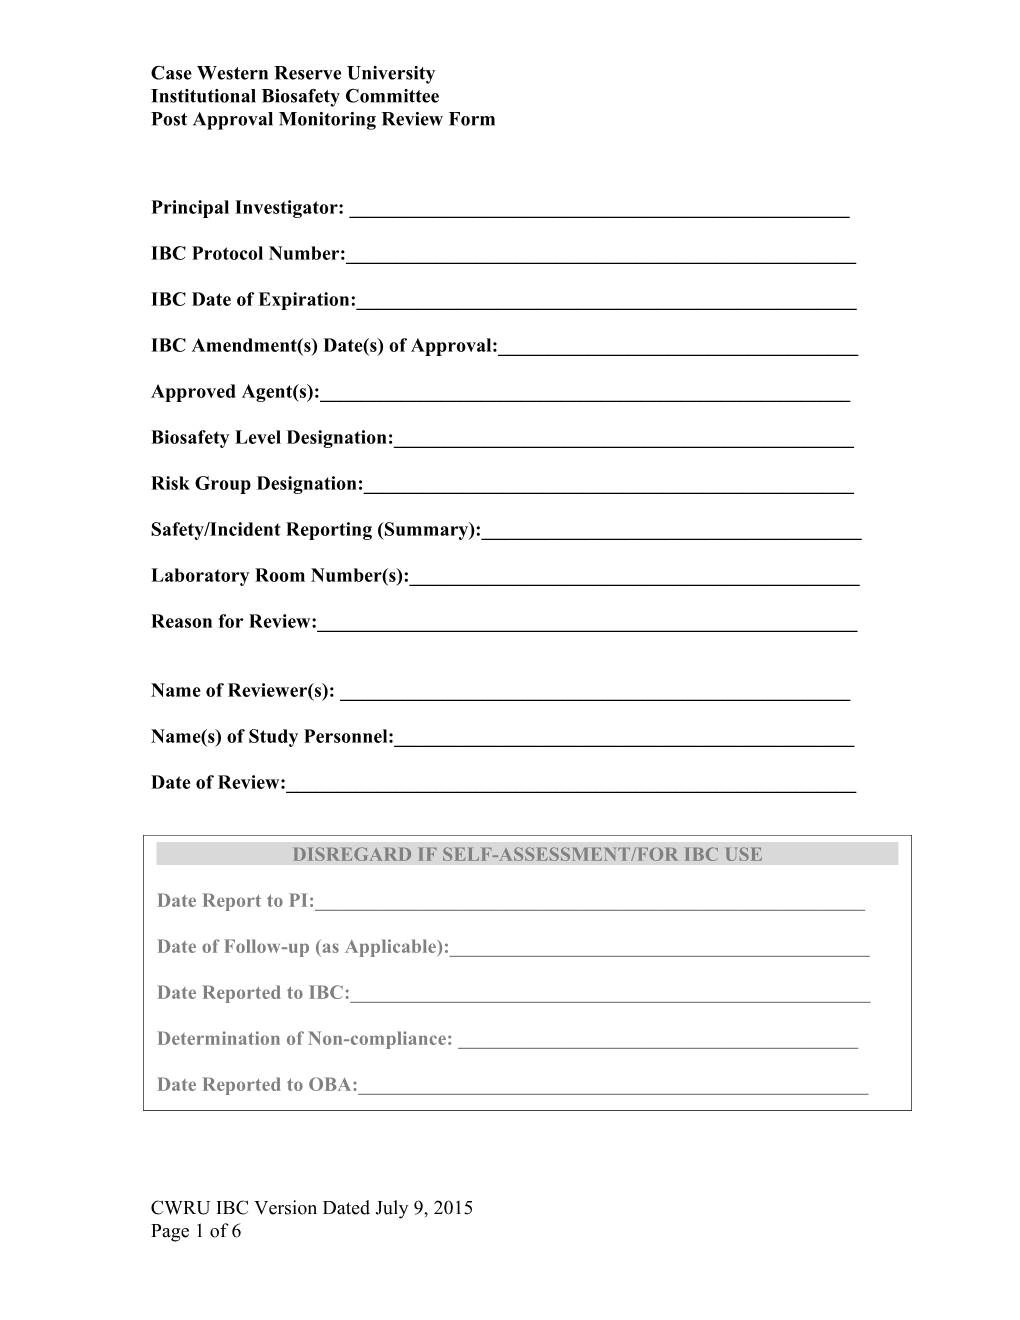 Post Approval Monitoring Review Form